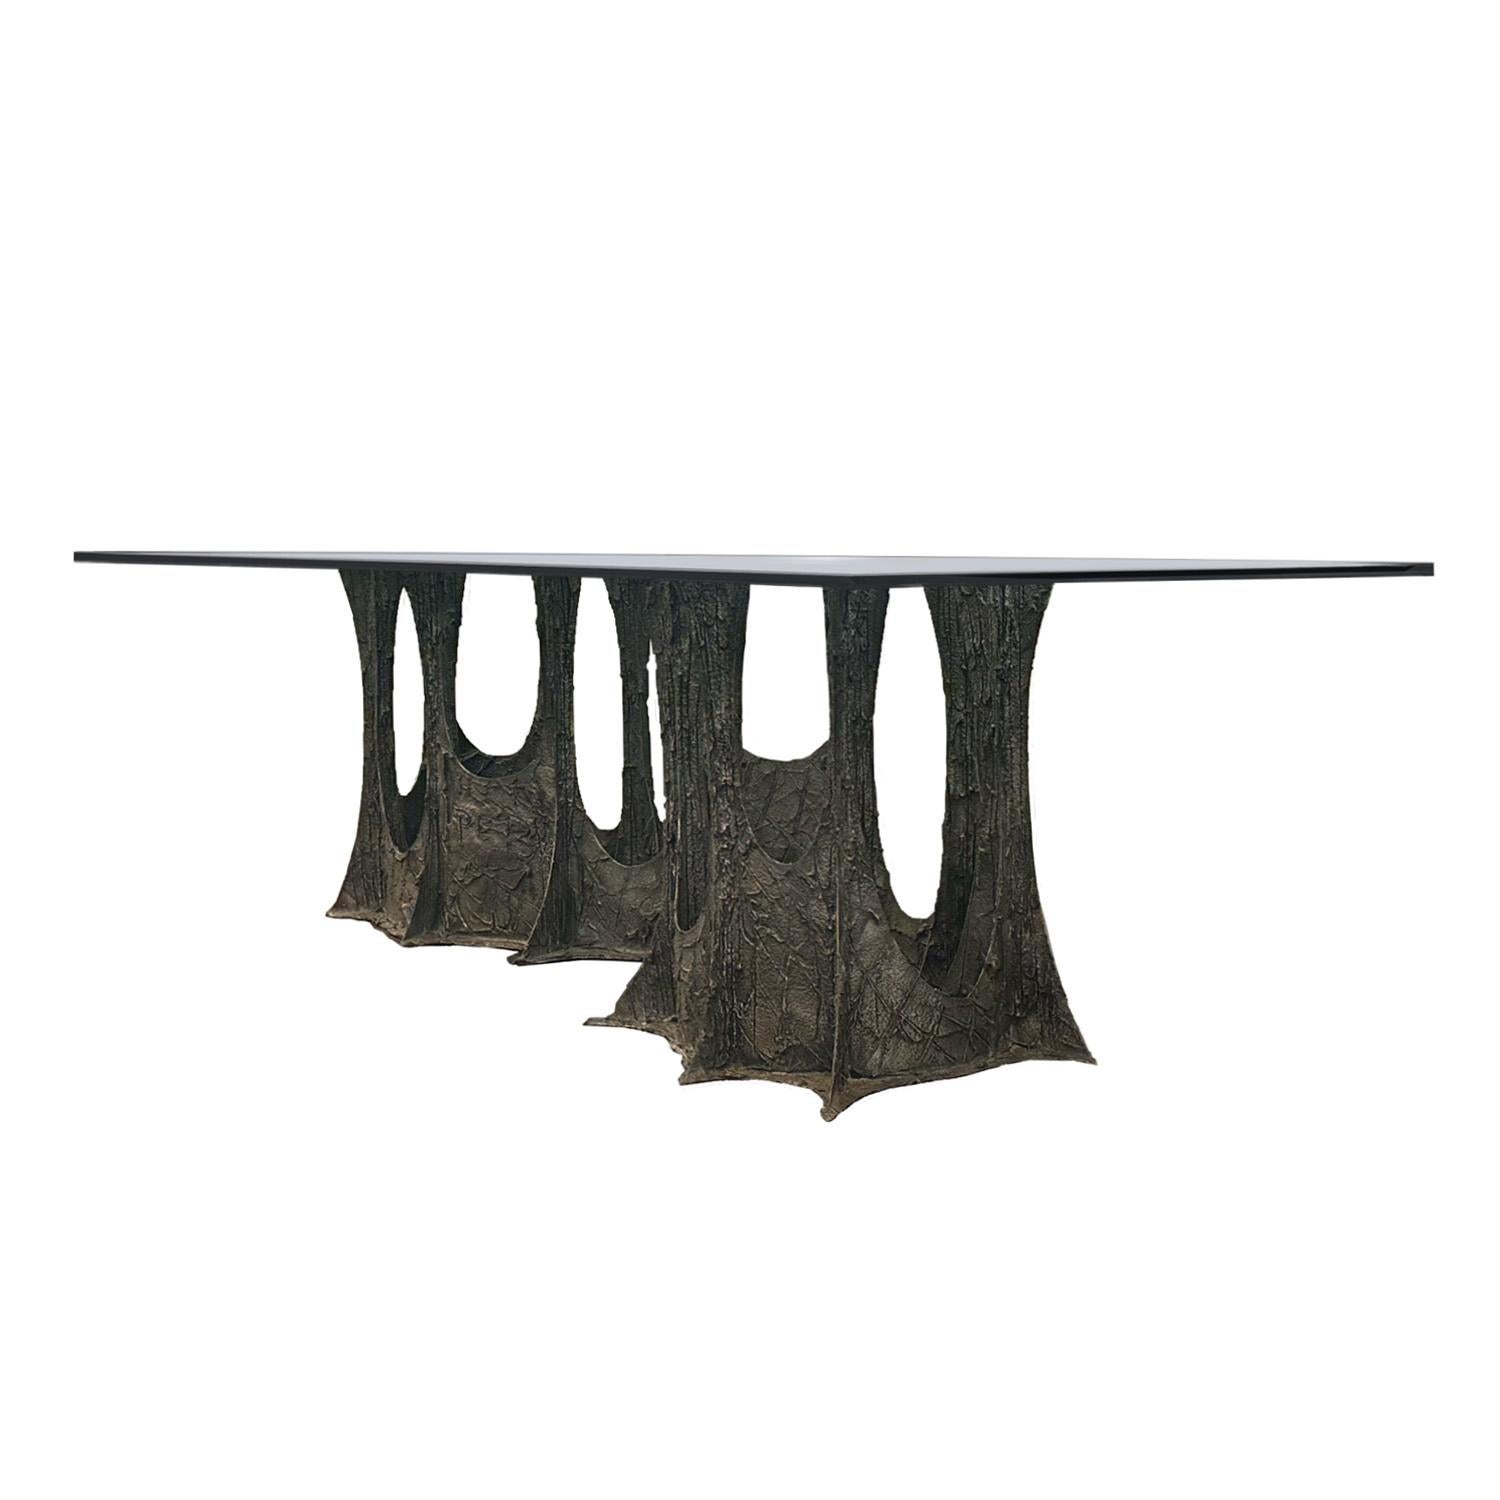 Hand crafted epoxy and atomized bronze applied over steel, dining table base with thick glass top. This iconic table combining traditional craft with experimental materials is signed and dated PE 73 on the lower left portion of base. Can accept a